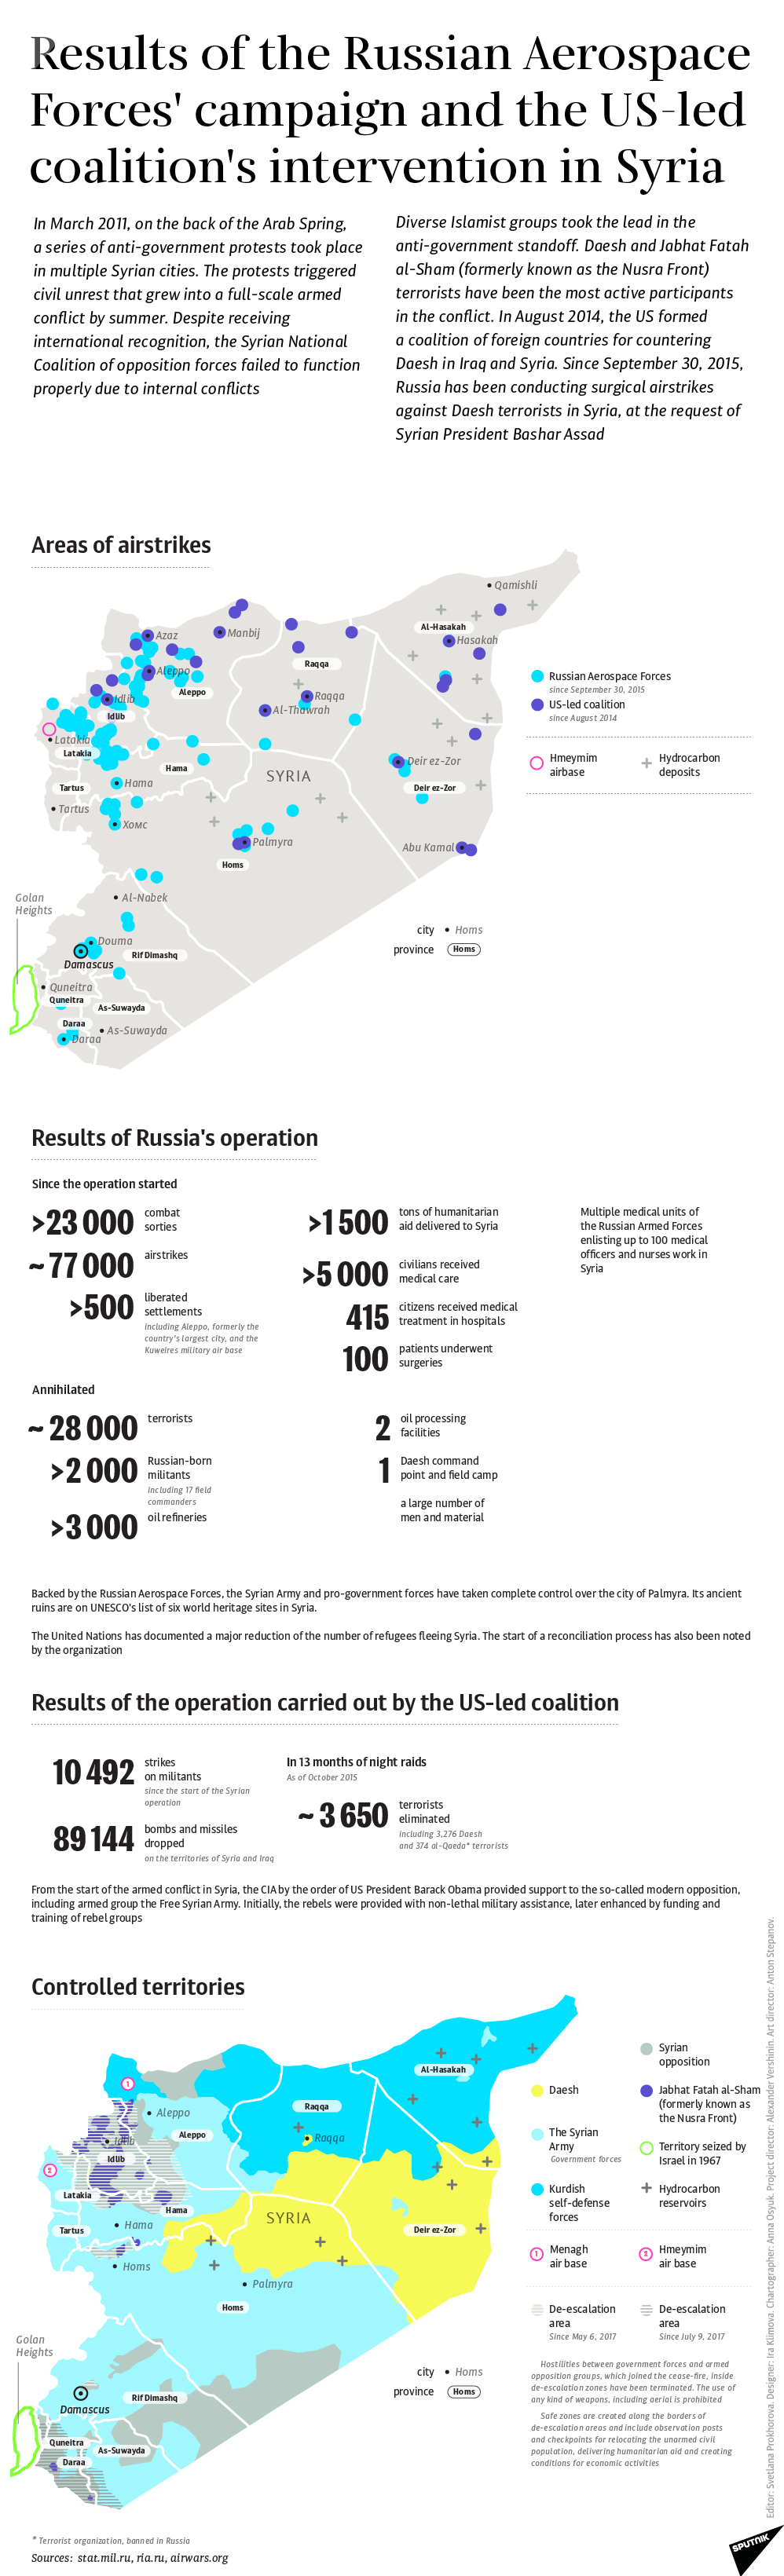 Results of Russian Air Campaign and US-led Coalition Intervention in Syria